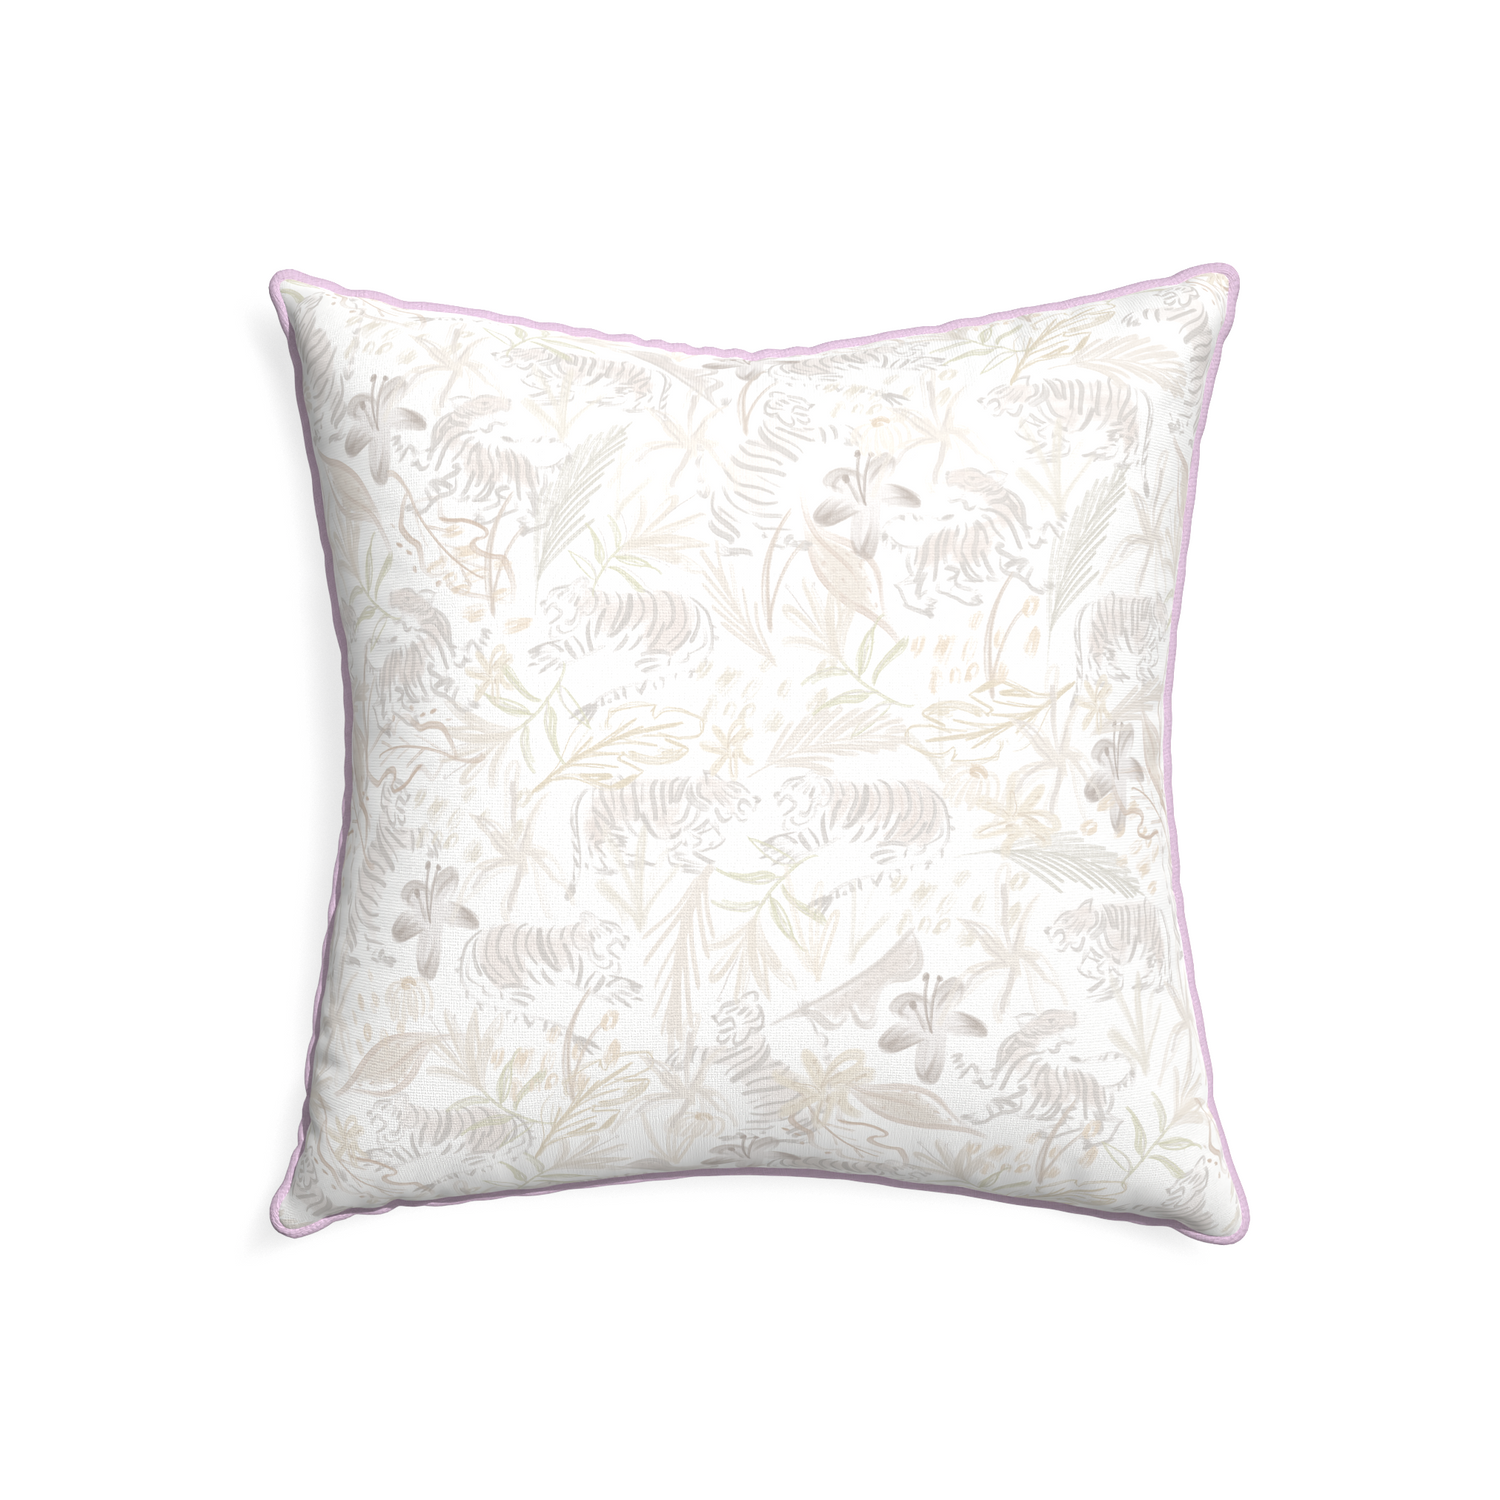 22-square frida sand custom pillow with l piping on white background